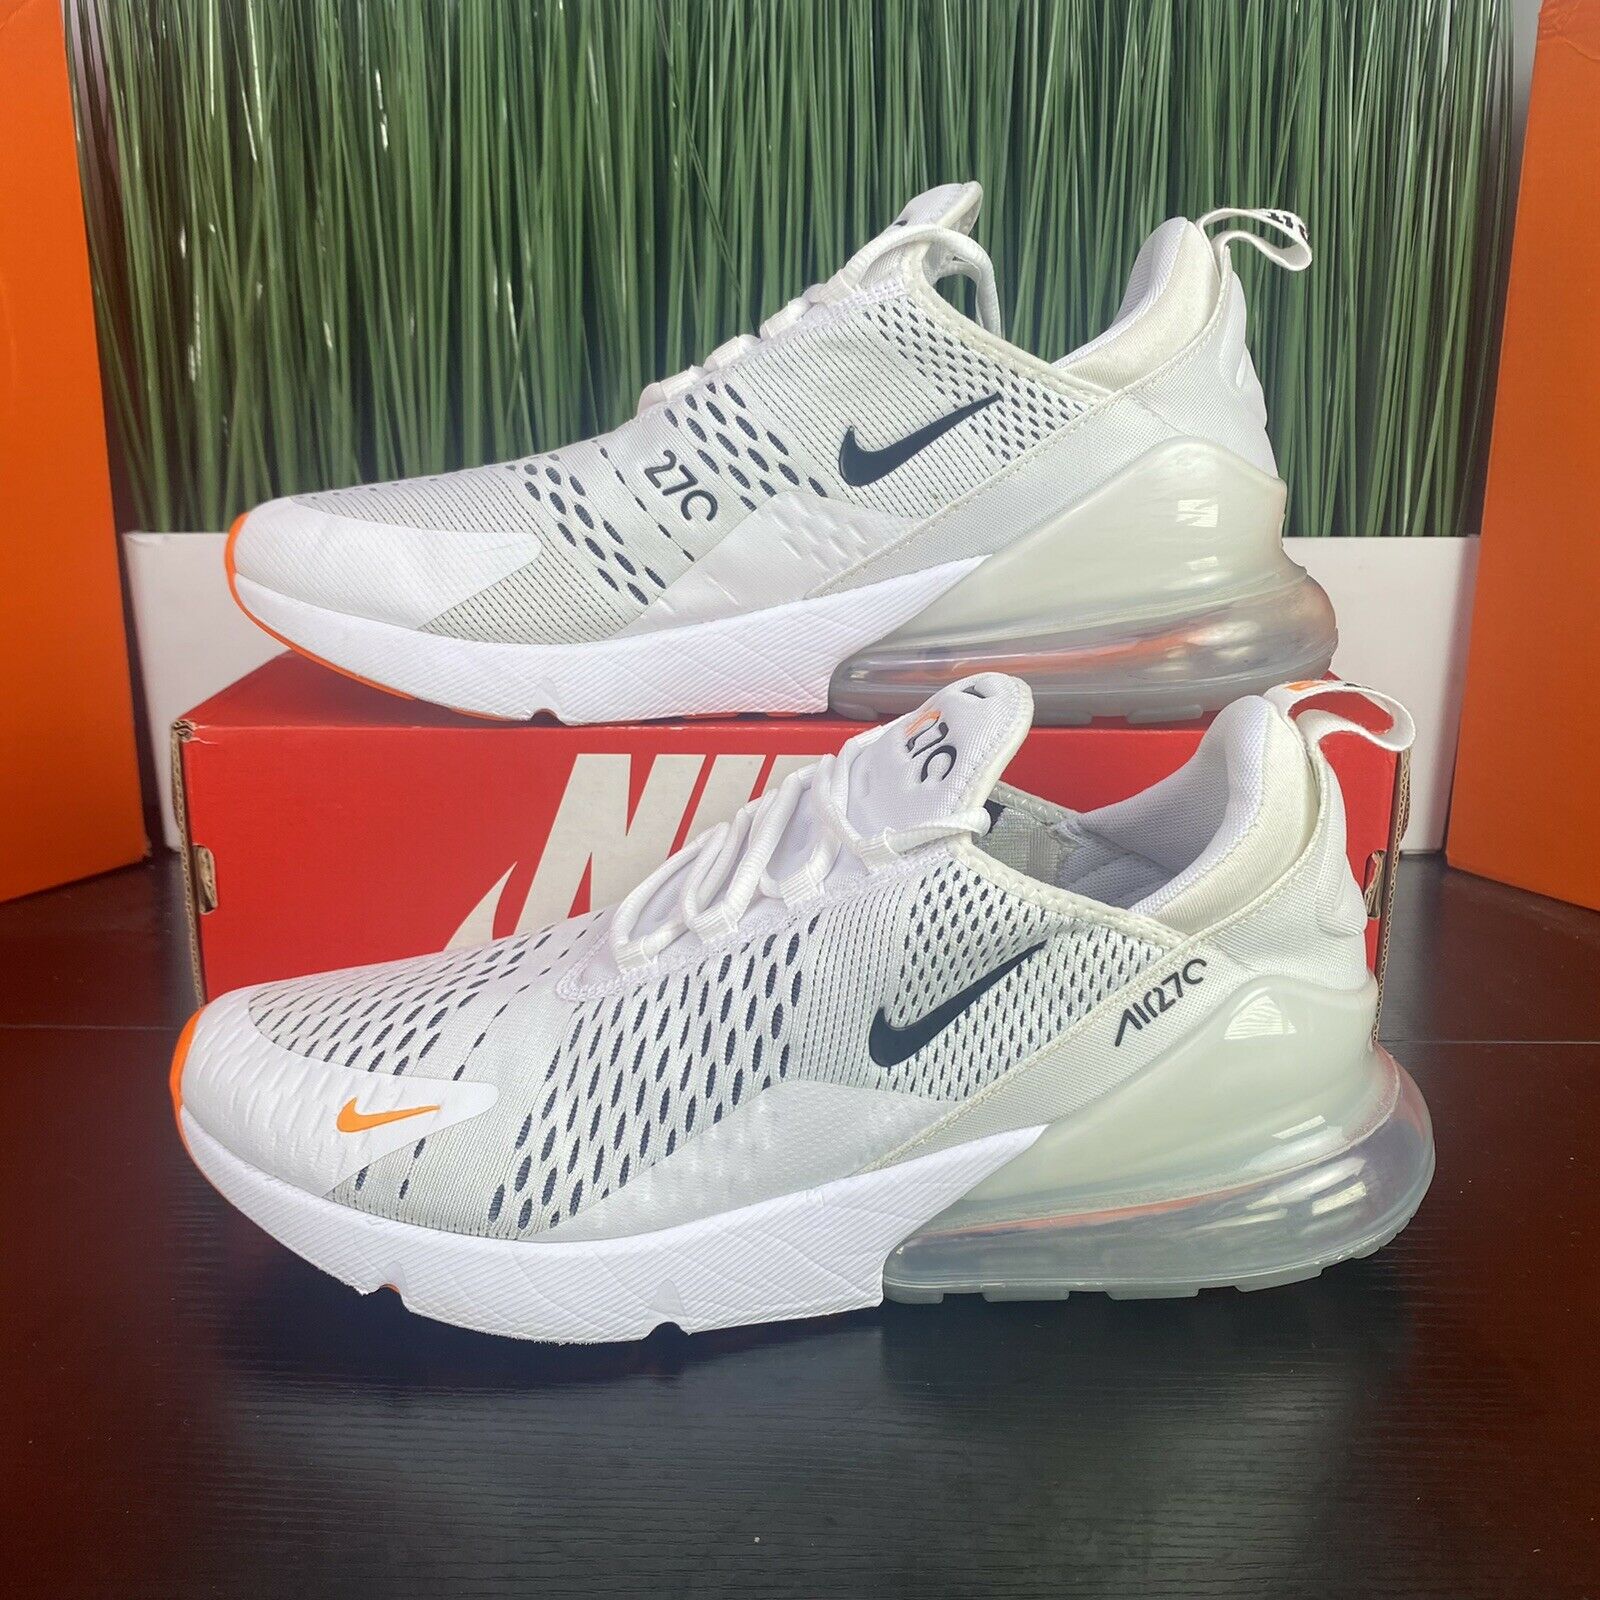 Nike Air Max 270 JDI Just Do It Triple White Mens Shoes AH8050-106 Size 12